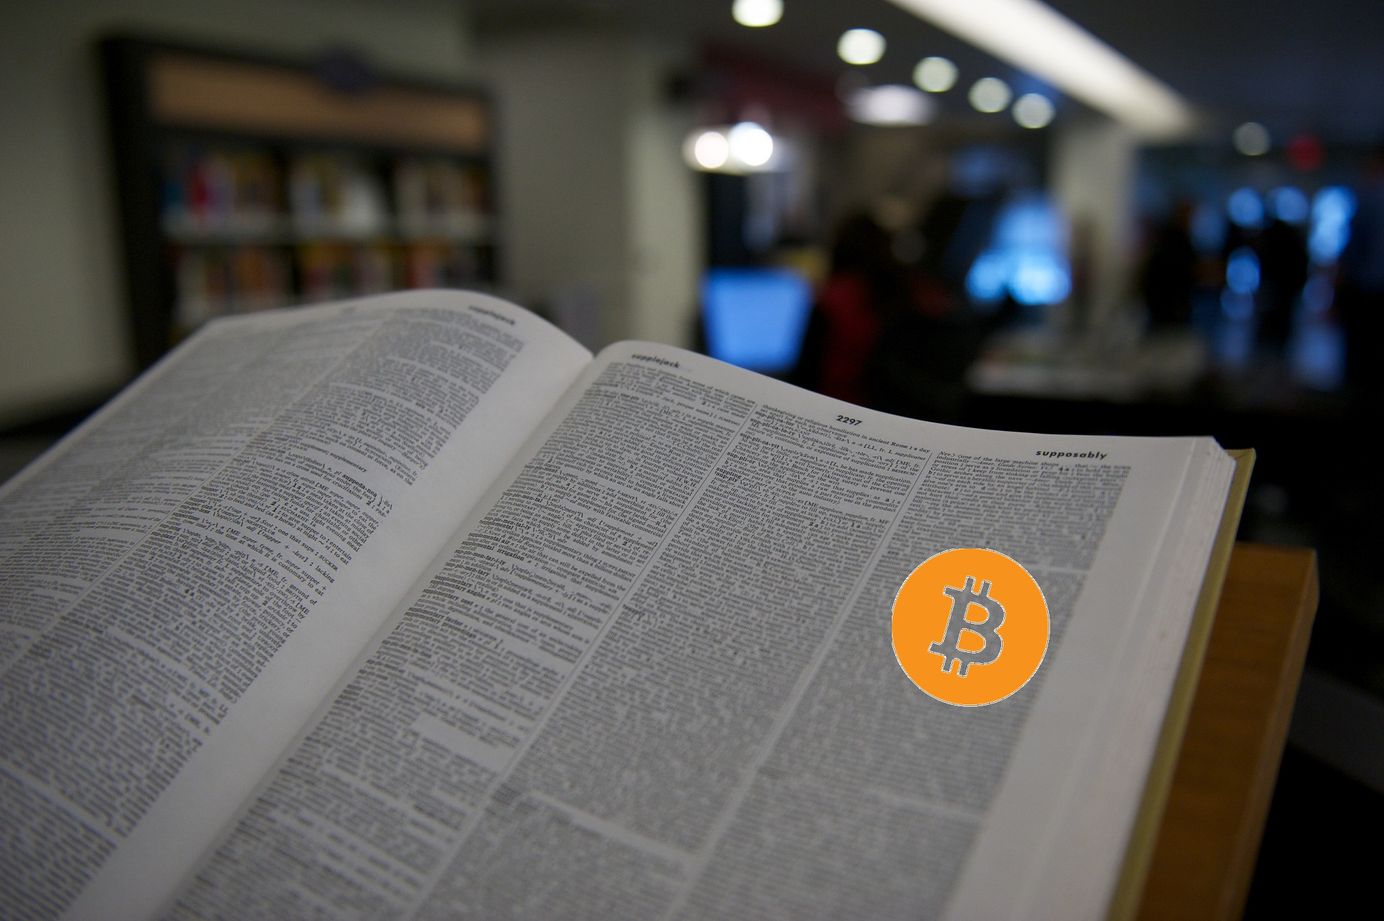 "Cryptocurrency", "ICO","Blockchain" soon to enter Merriam Webster Dictionary